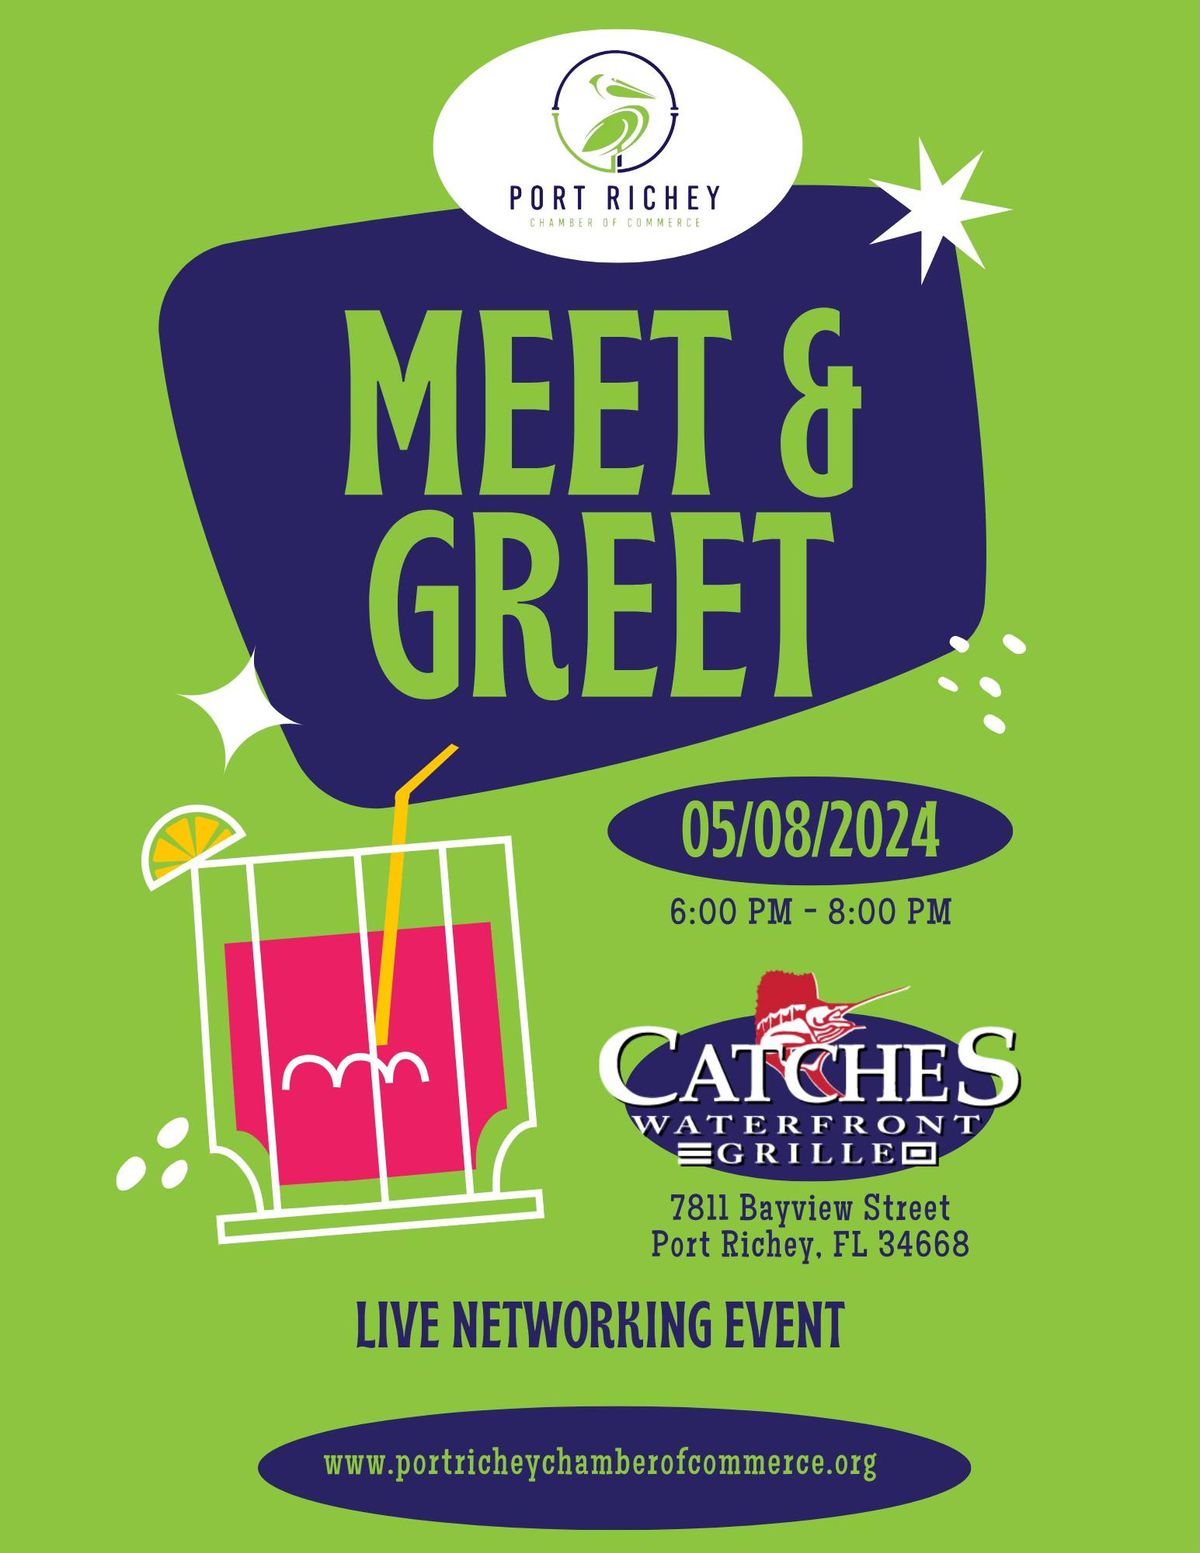 Meet & Greet Networking Event with PRCC